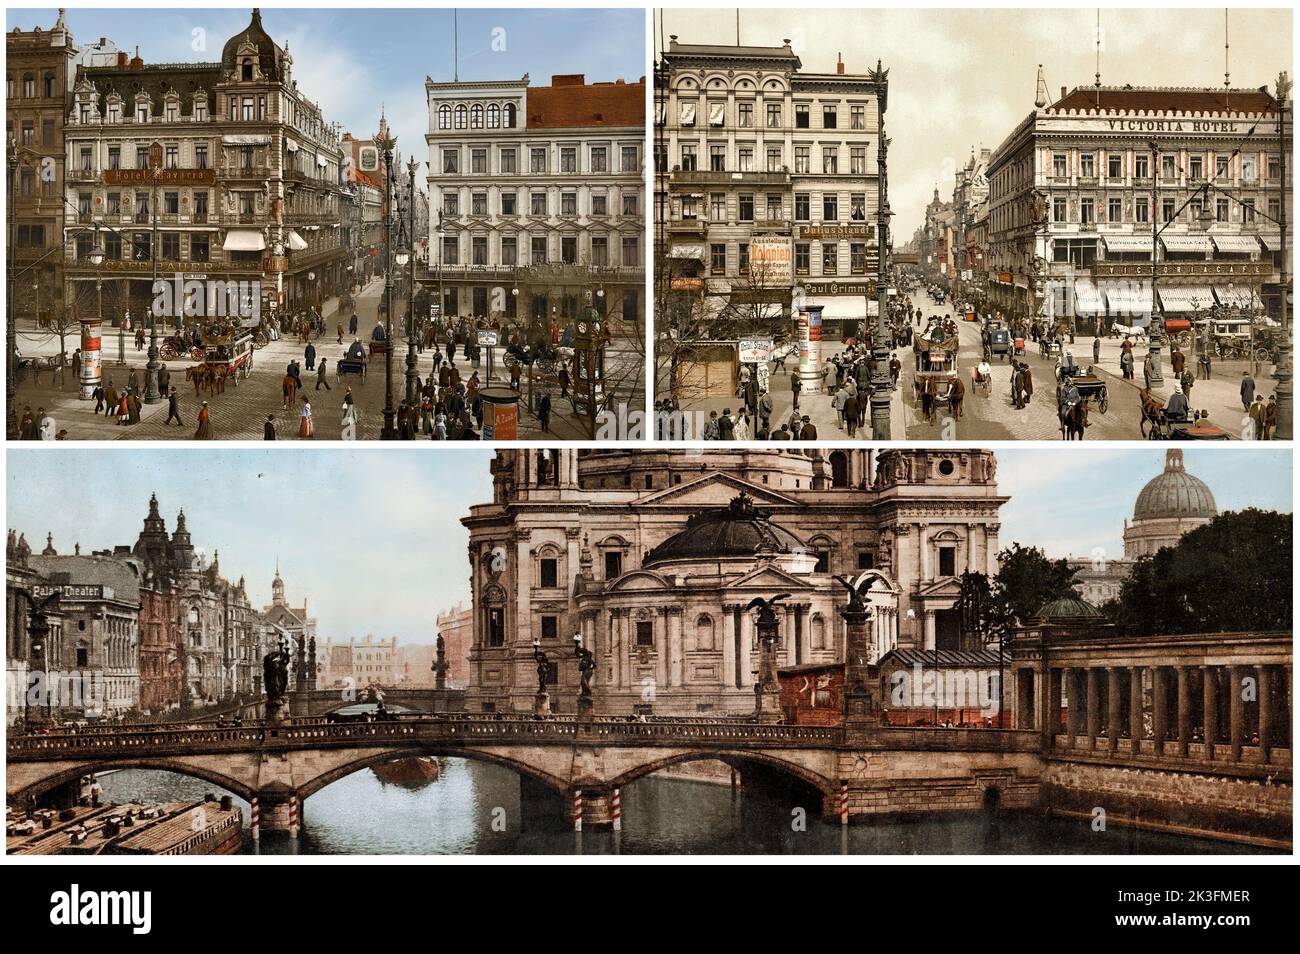 Berlin Ende 1800s und Anfang 1900s Stockfoto